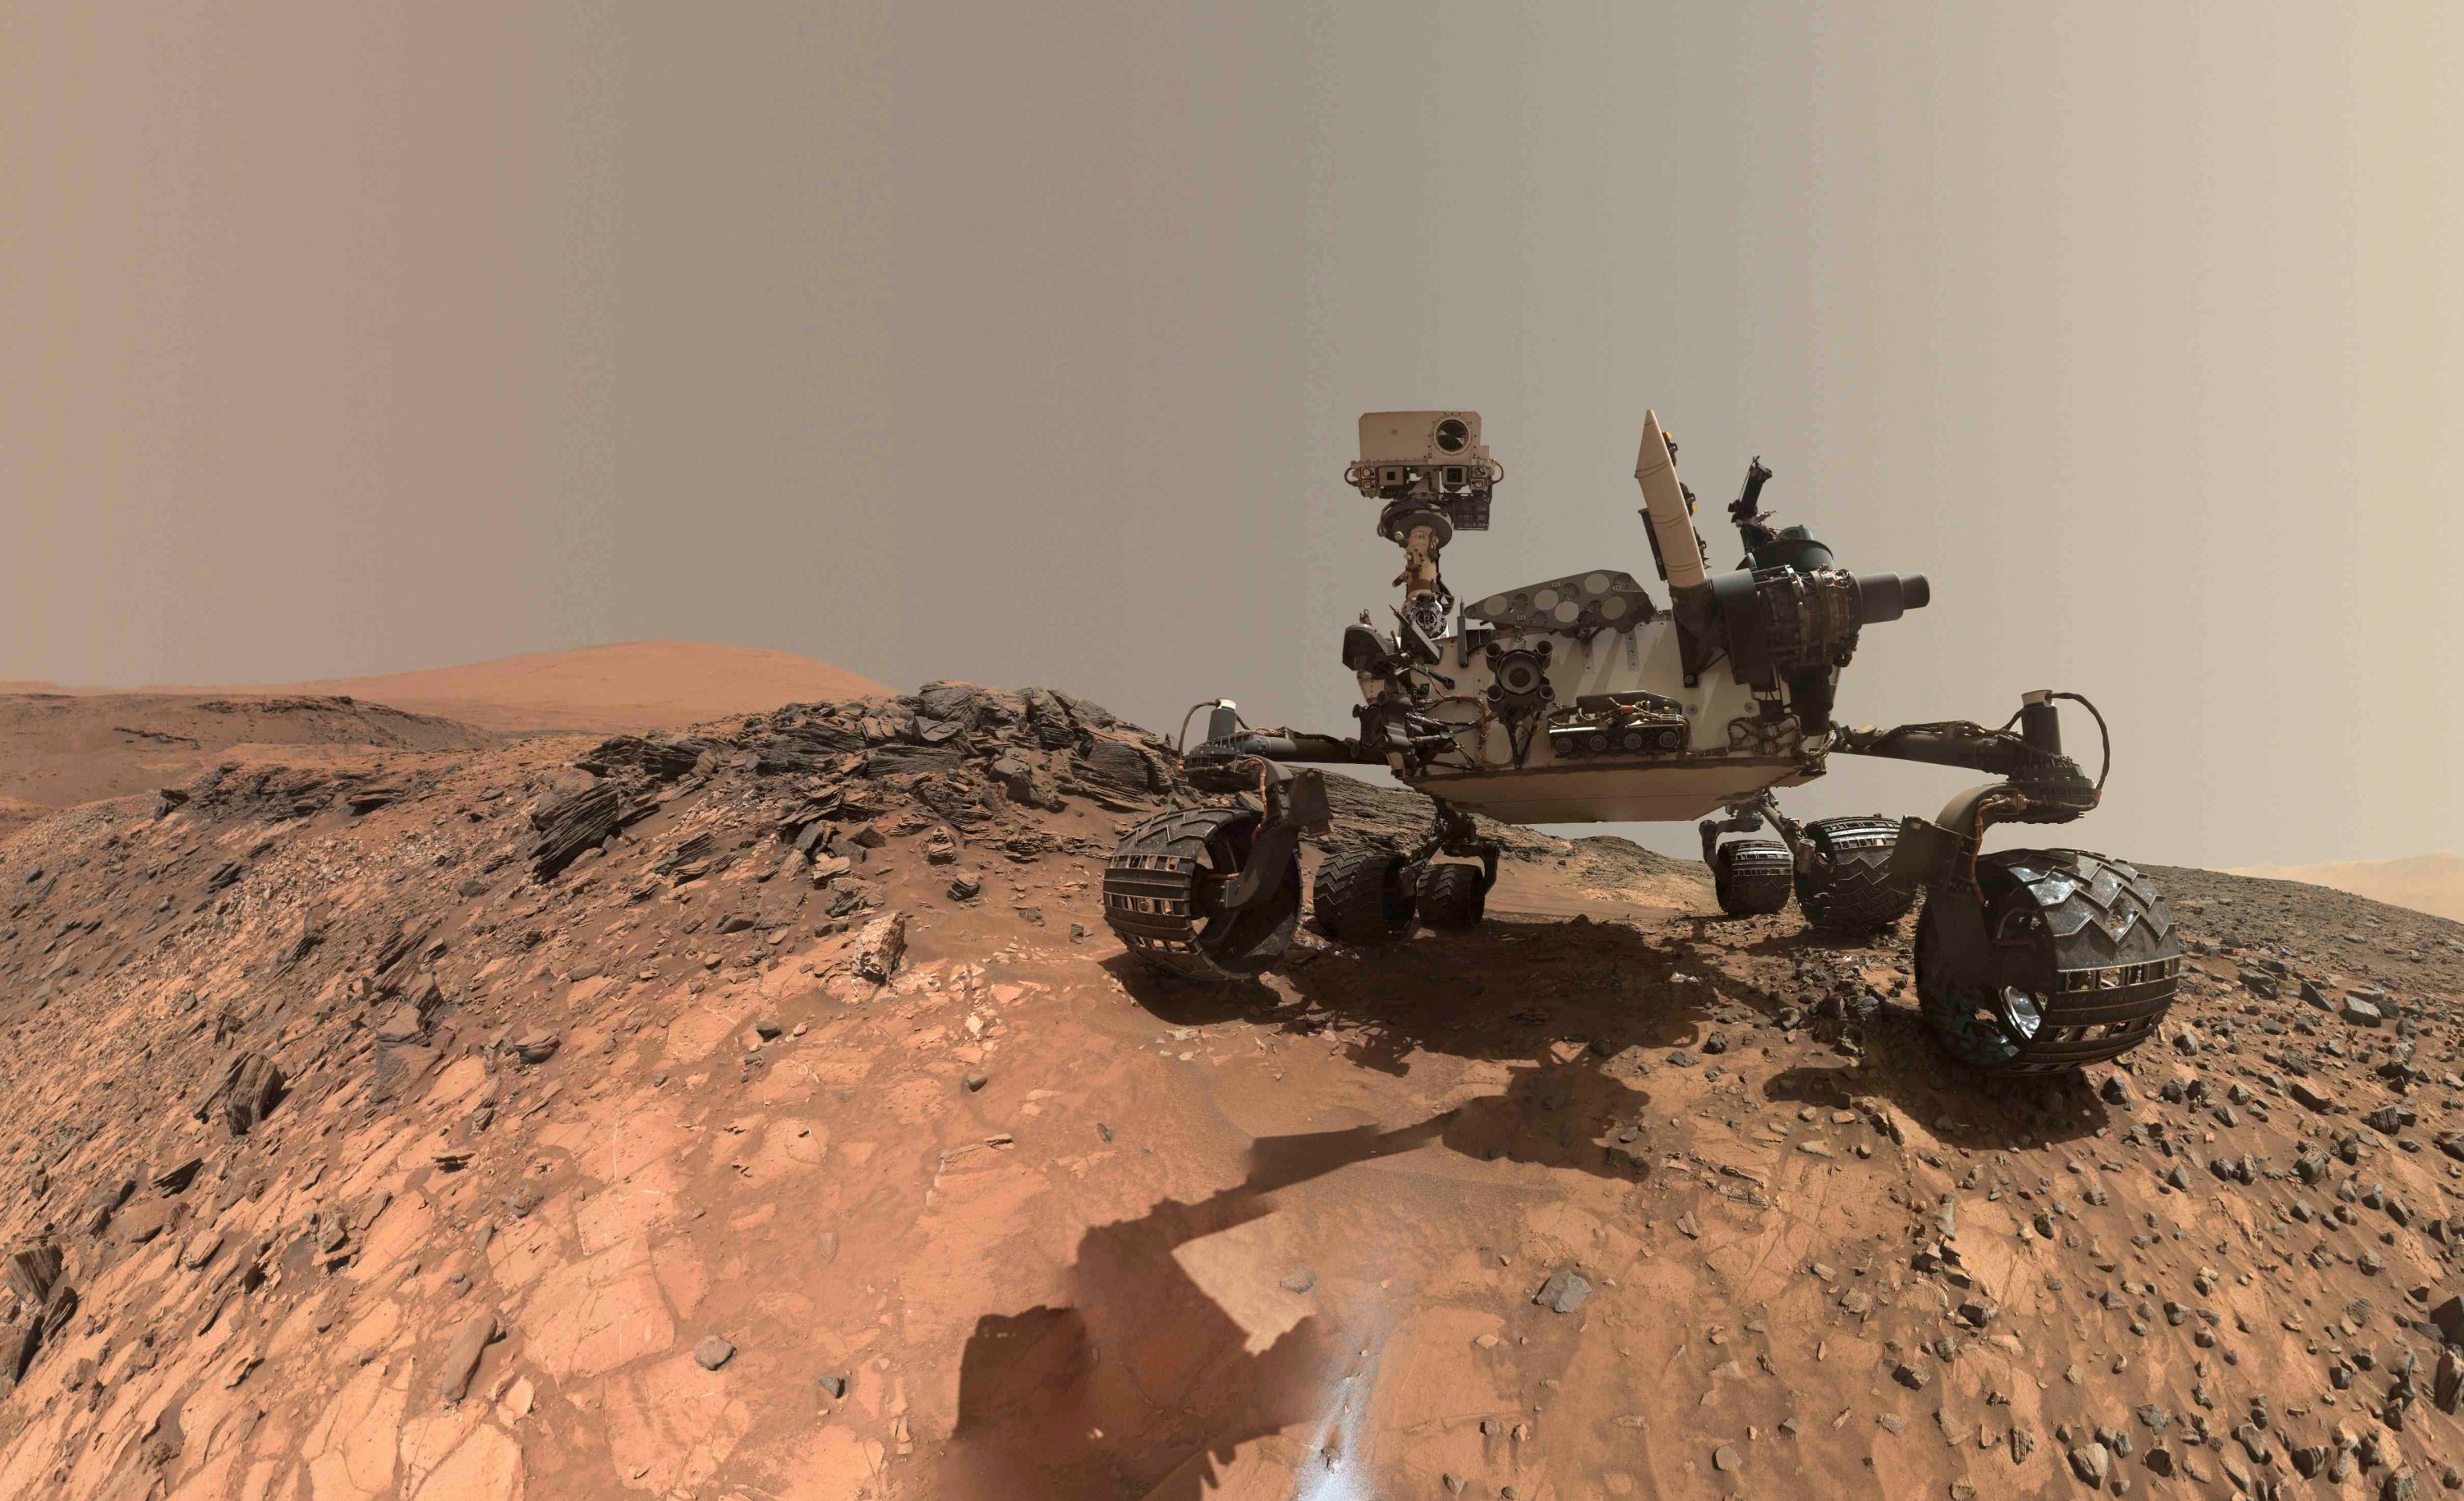 A low-angle self-portrait of NASA's Curiosity Mars rover showing the vehicle at the site from which it reached down to drill into a rock target call 'Buckskin' is shown in this handout photo, taken Aug. 5, 2015, and provided by NASA on Oct. 8, 2015. (Reuters Photo)